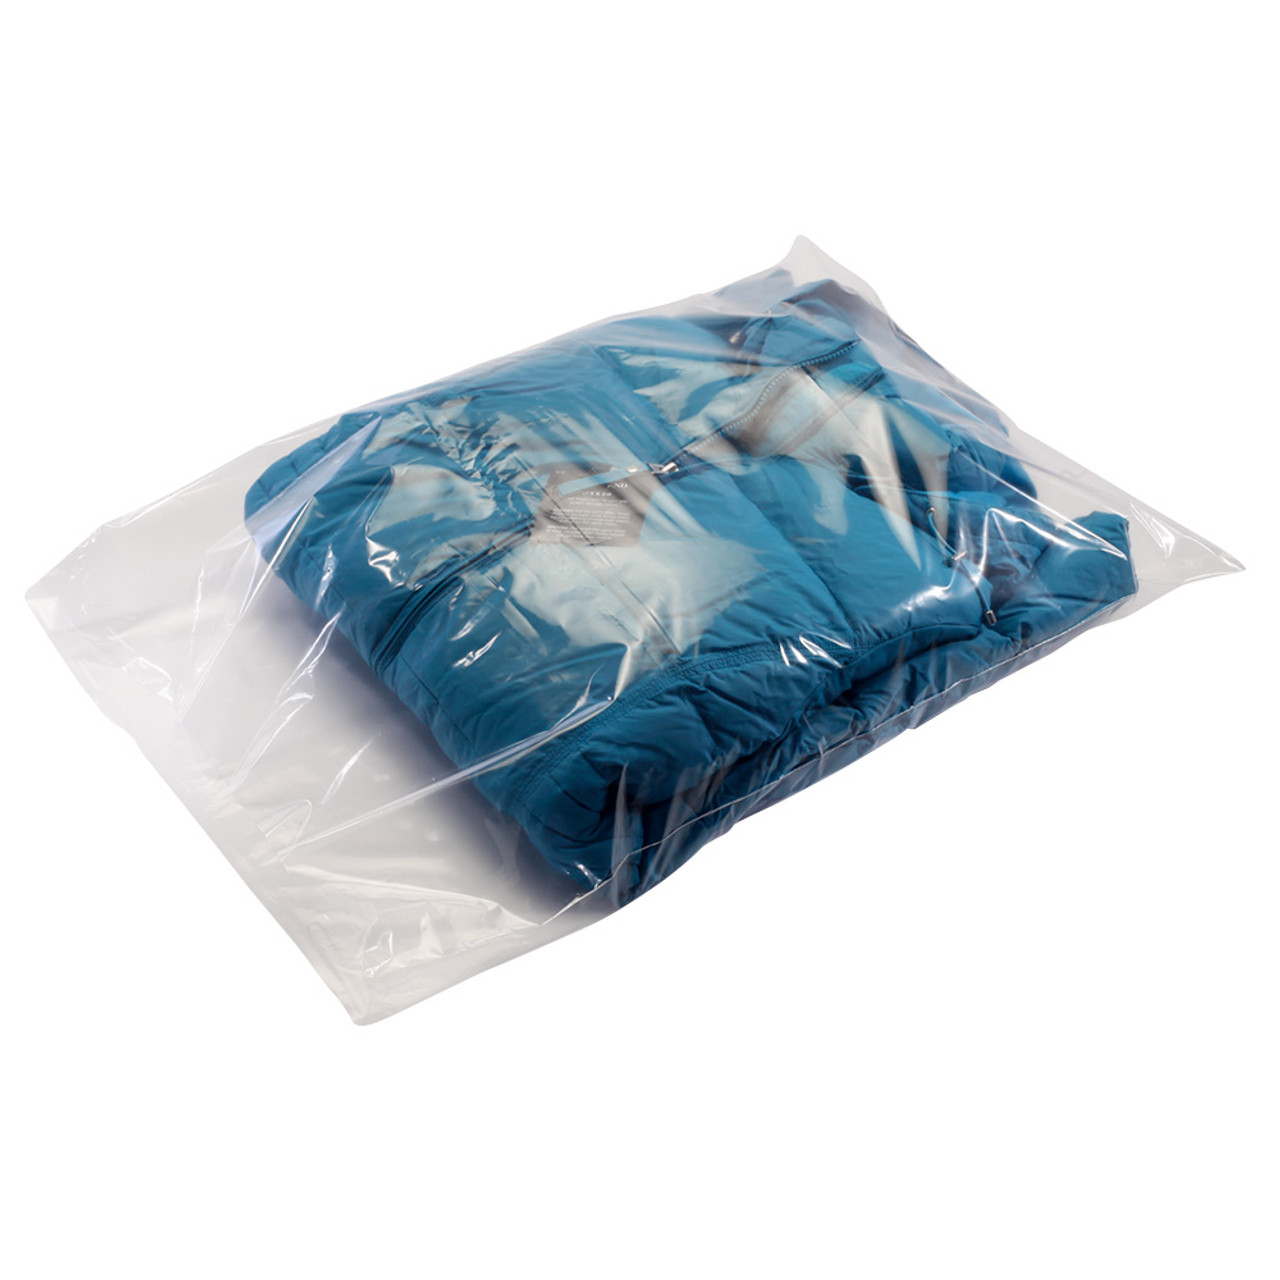 10X15 - 1.5 mil - clear - layflat poly bags - 1000 bags/case